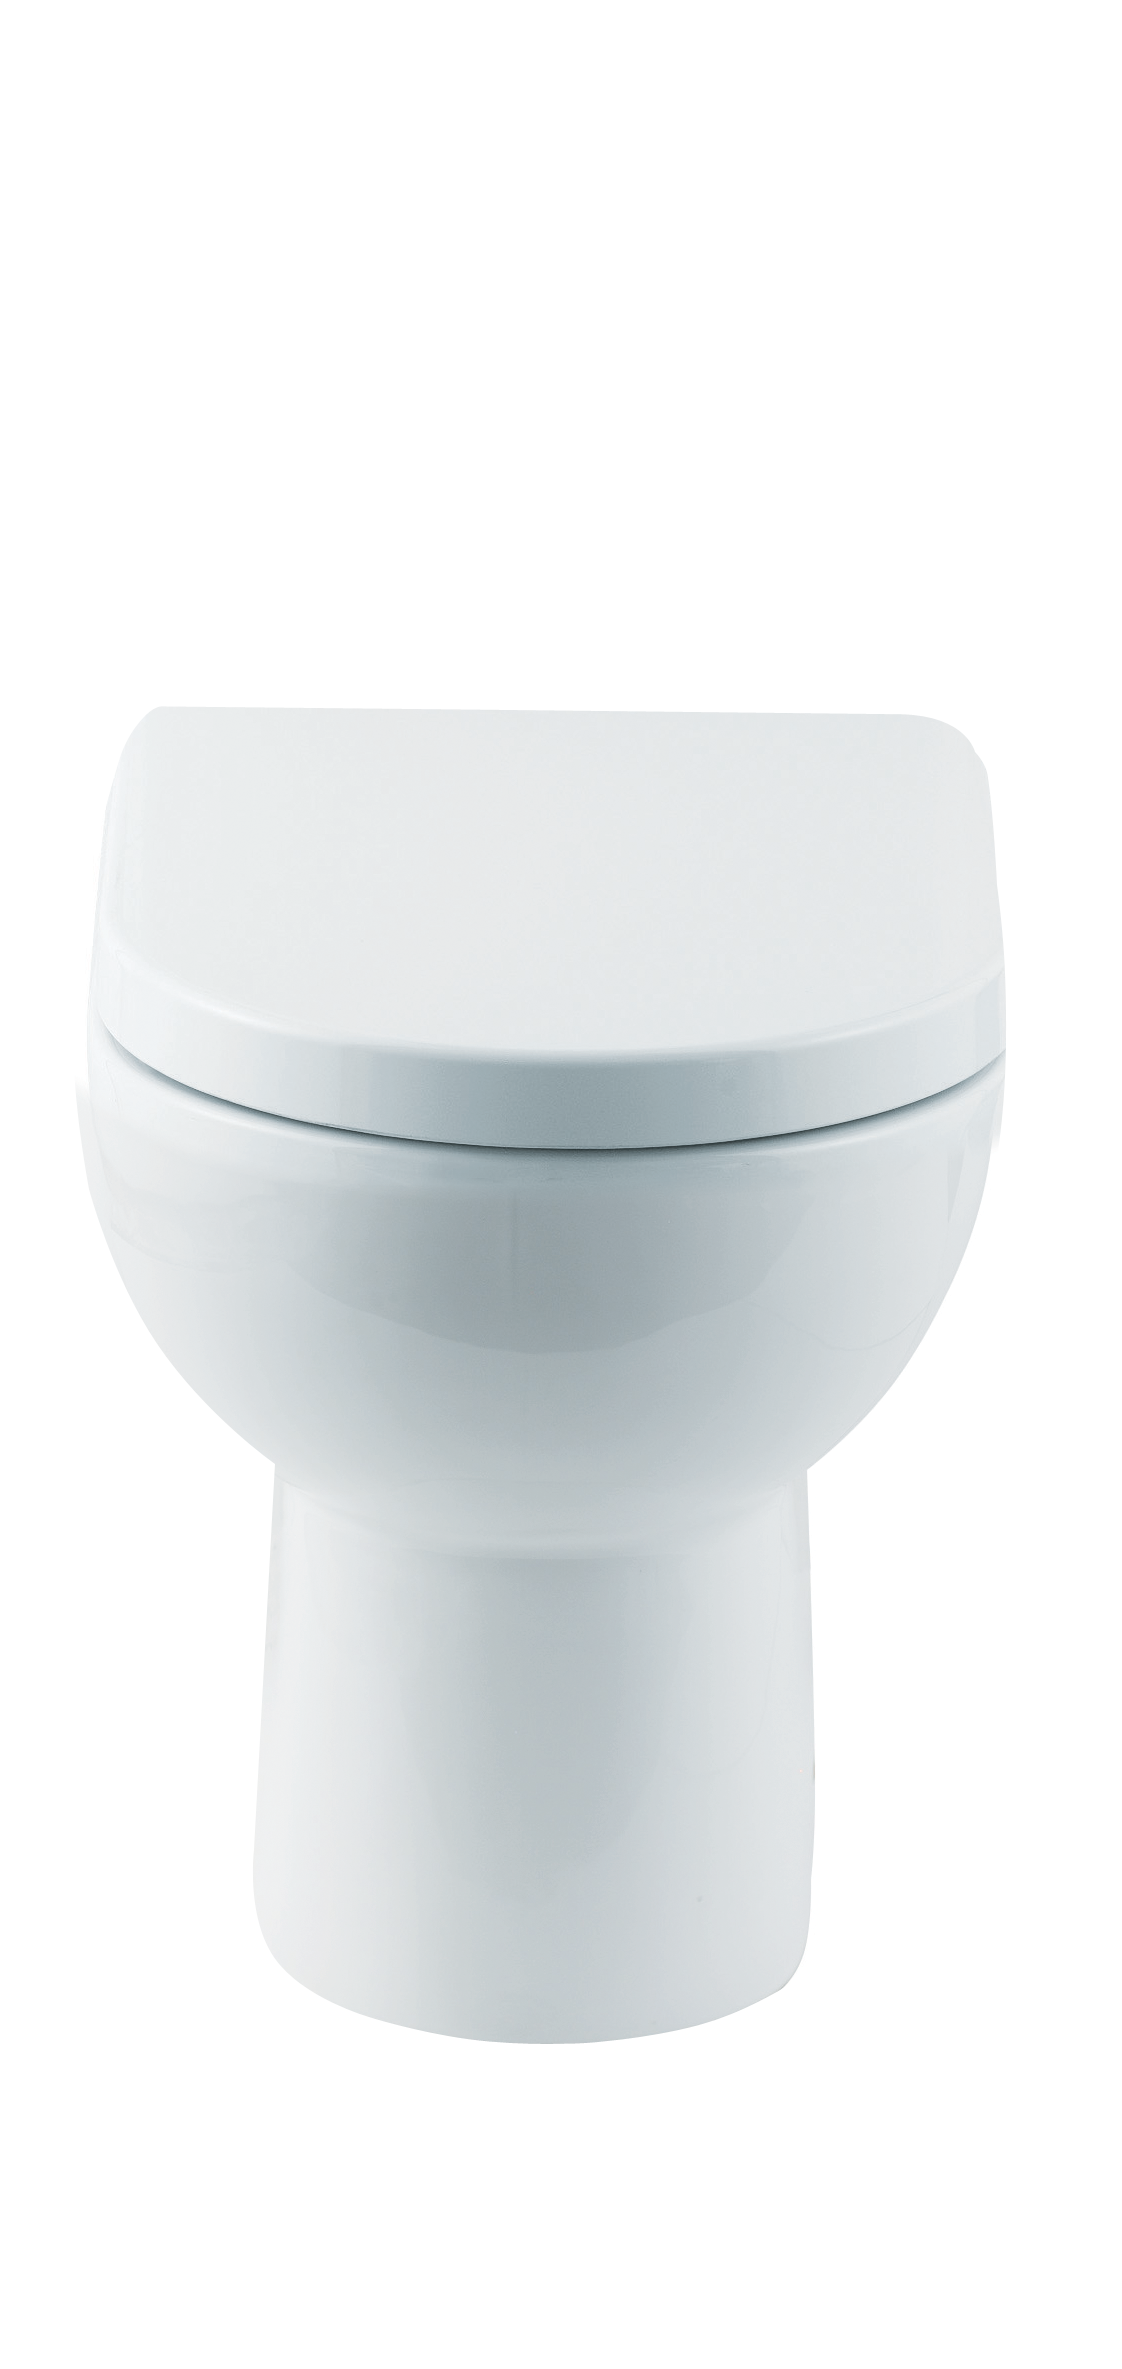 Toilet PNG Image